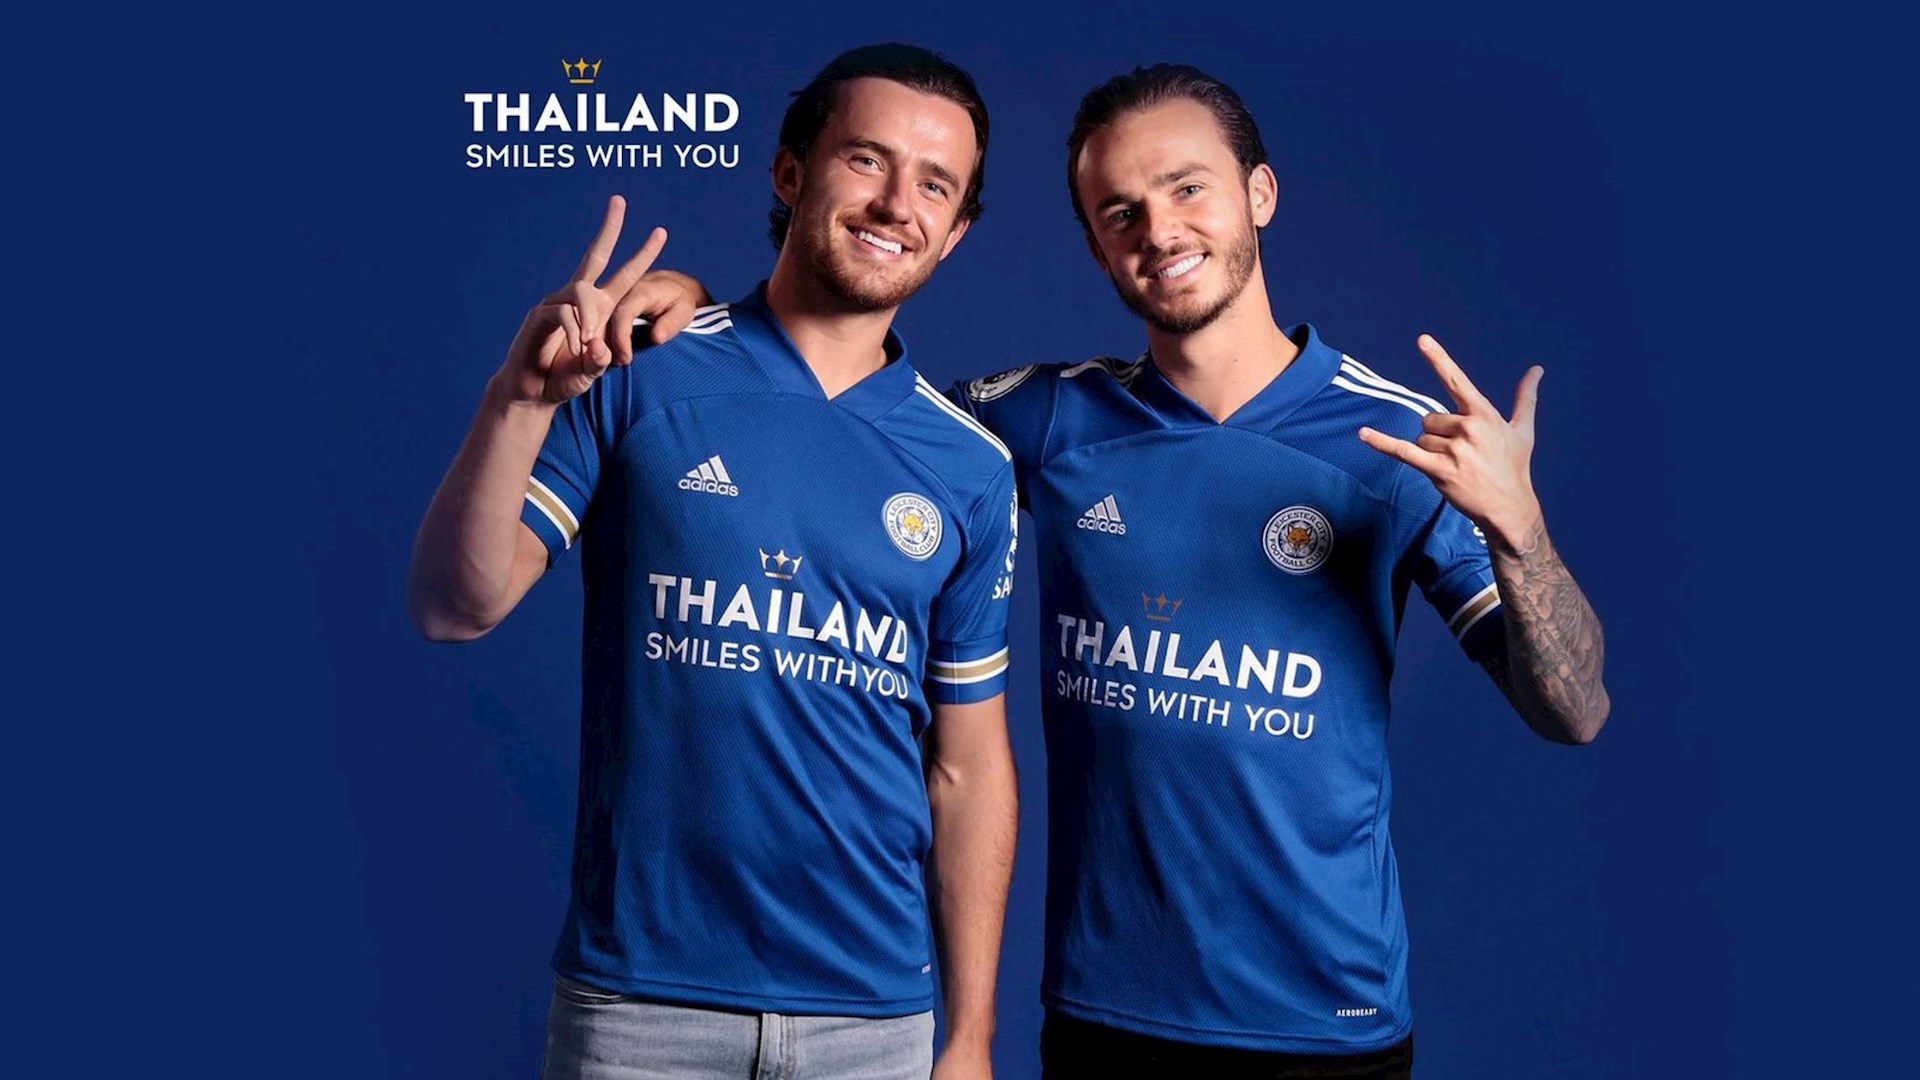 Leicester City thuisshirt 2020-2021 - Voetbalshirts.com